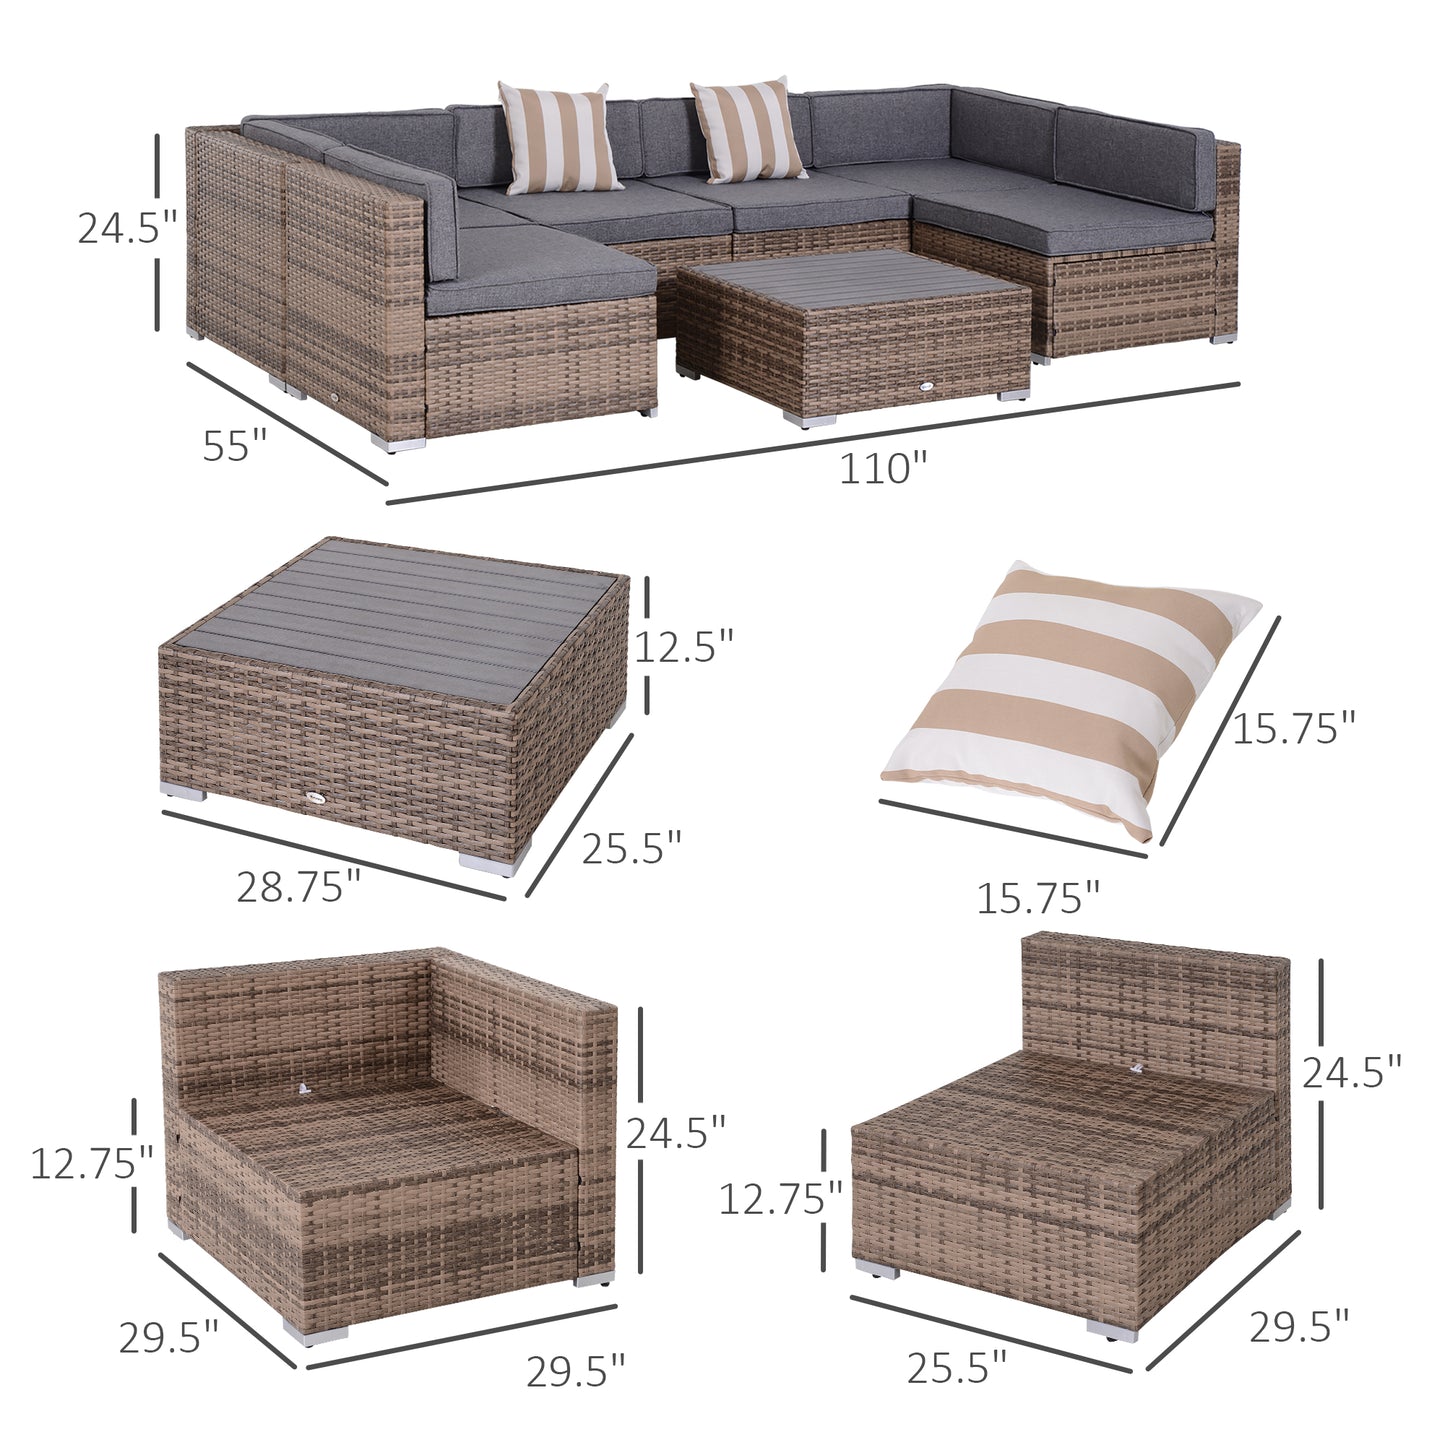 Outsunny 7-Piece Patio Furniture Sets Outdoor Wicker Conversation Sets All Weather PE Rattan Sectional sofa set, Grey